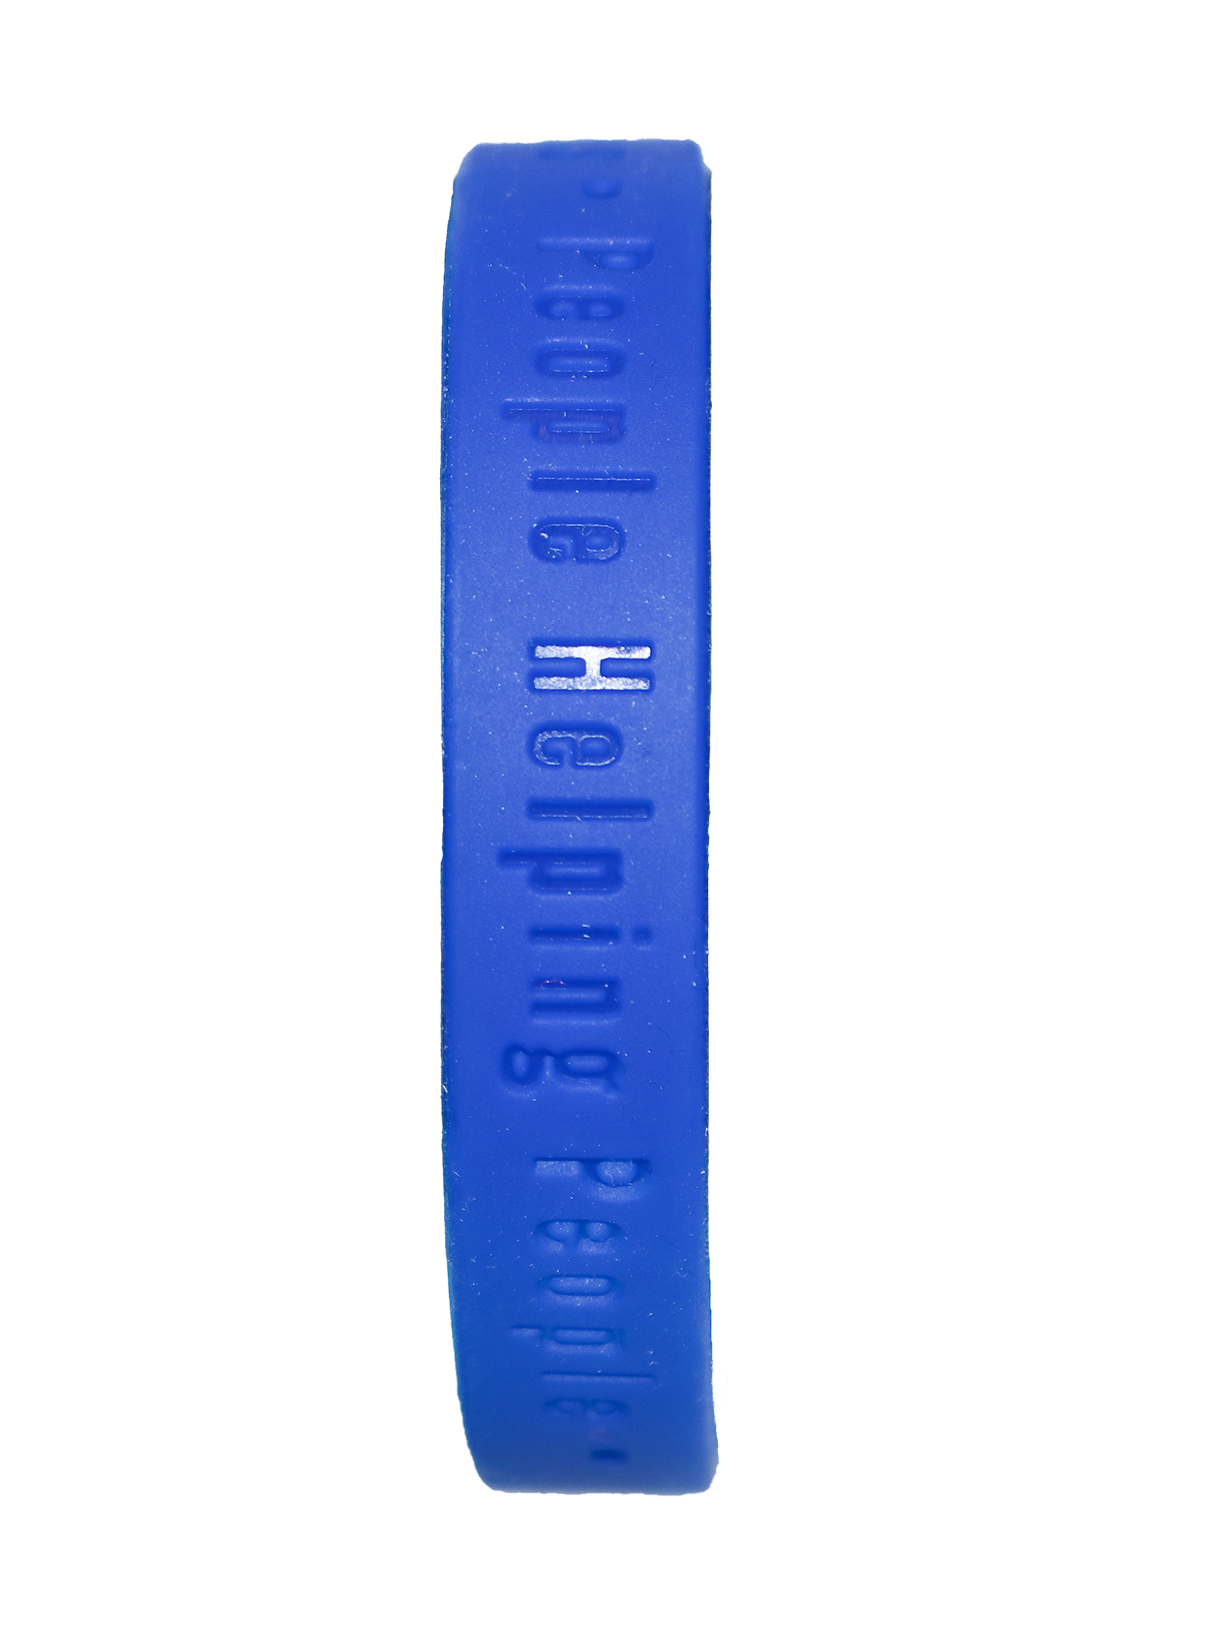 People Helping People - Dark Blue Silicone Wristbands (25/Bag)